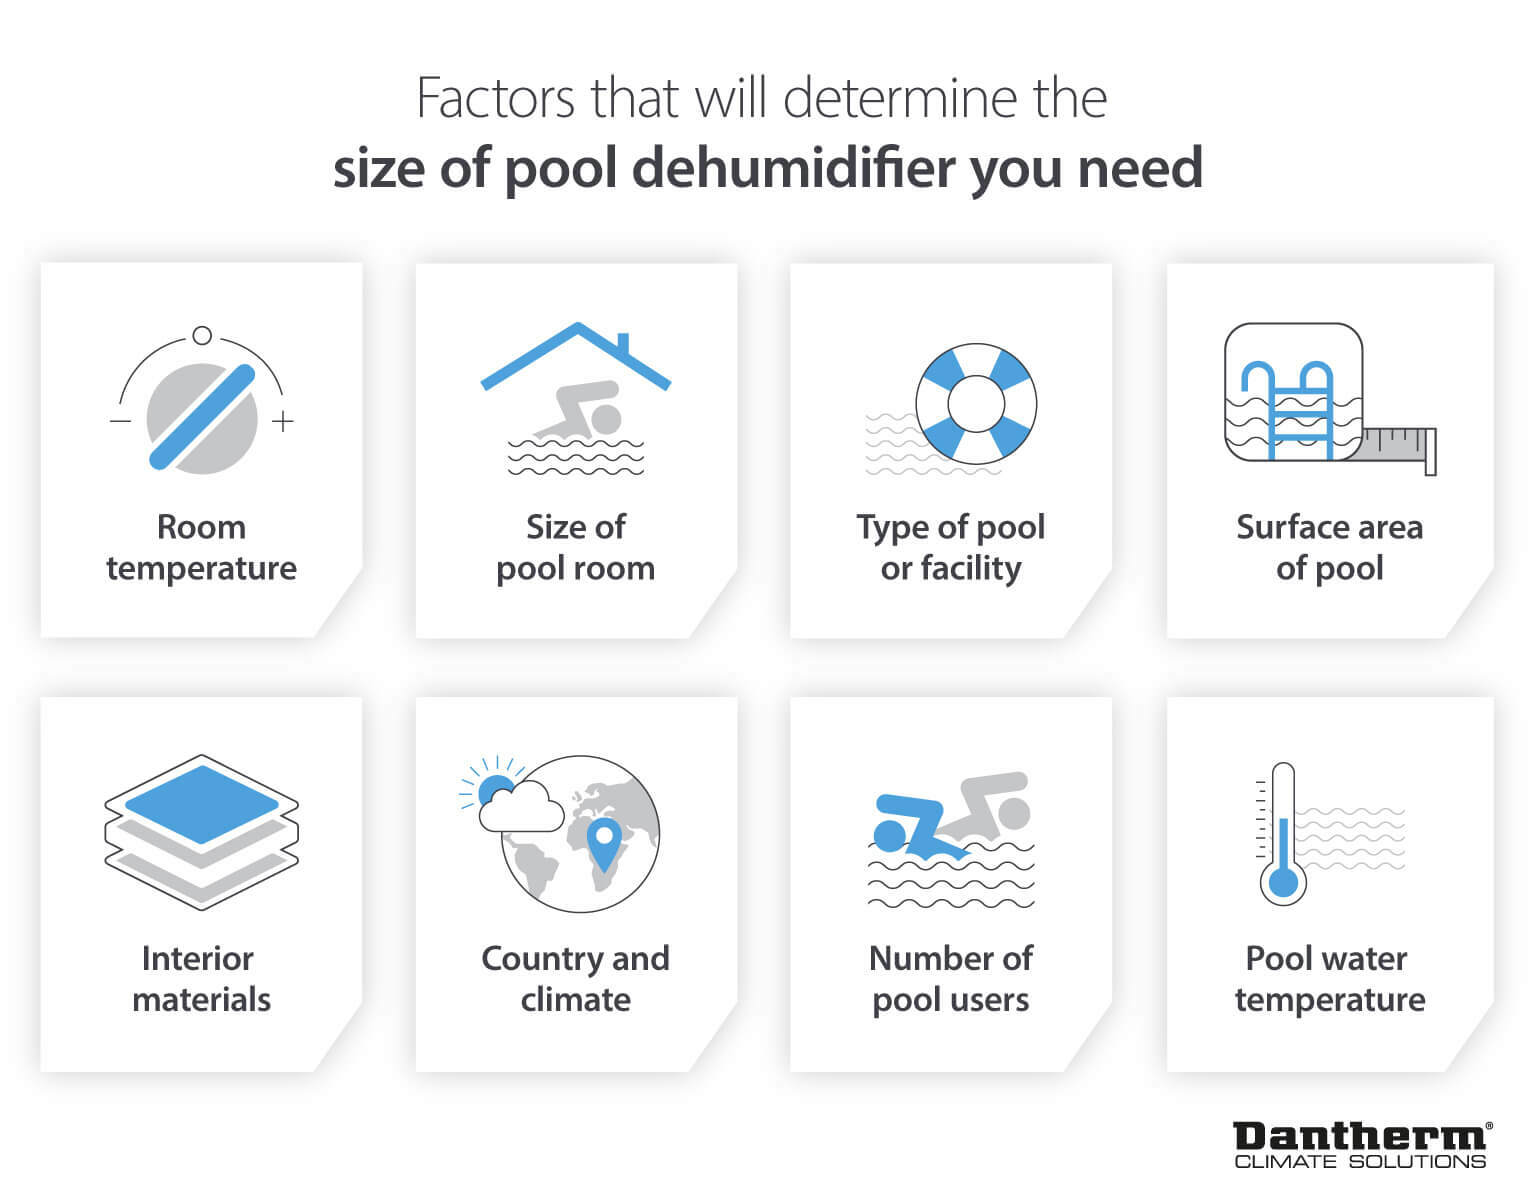 Infographic showing factors that affect the size of swimming pool dehumidifier you will need to buy